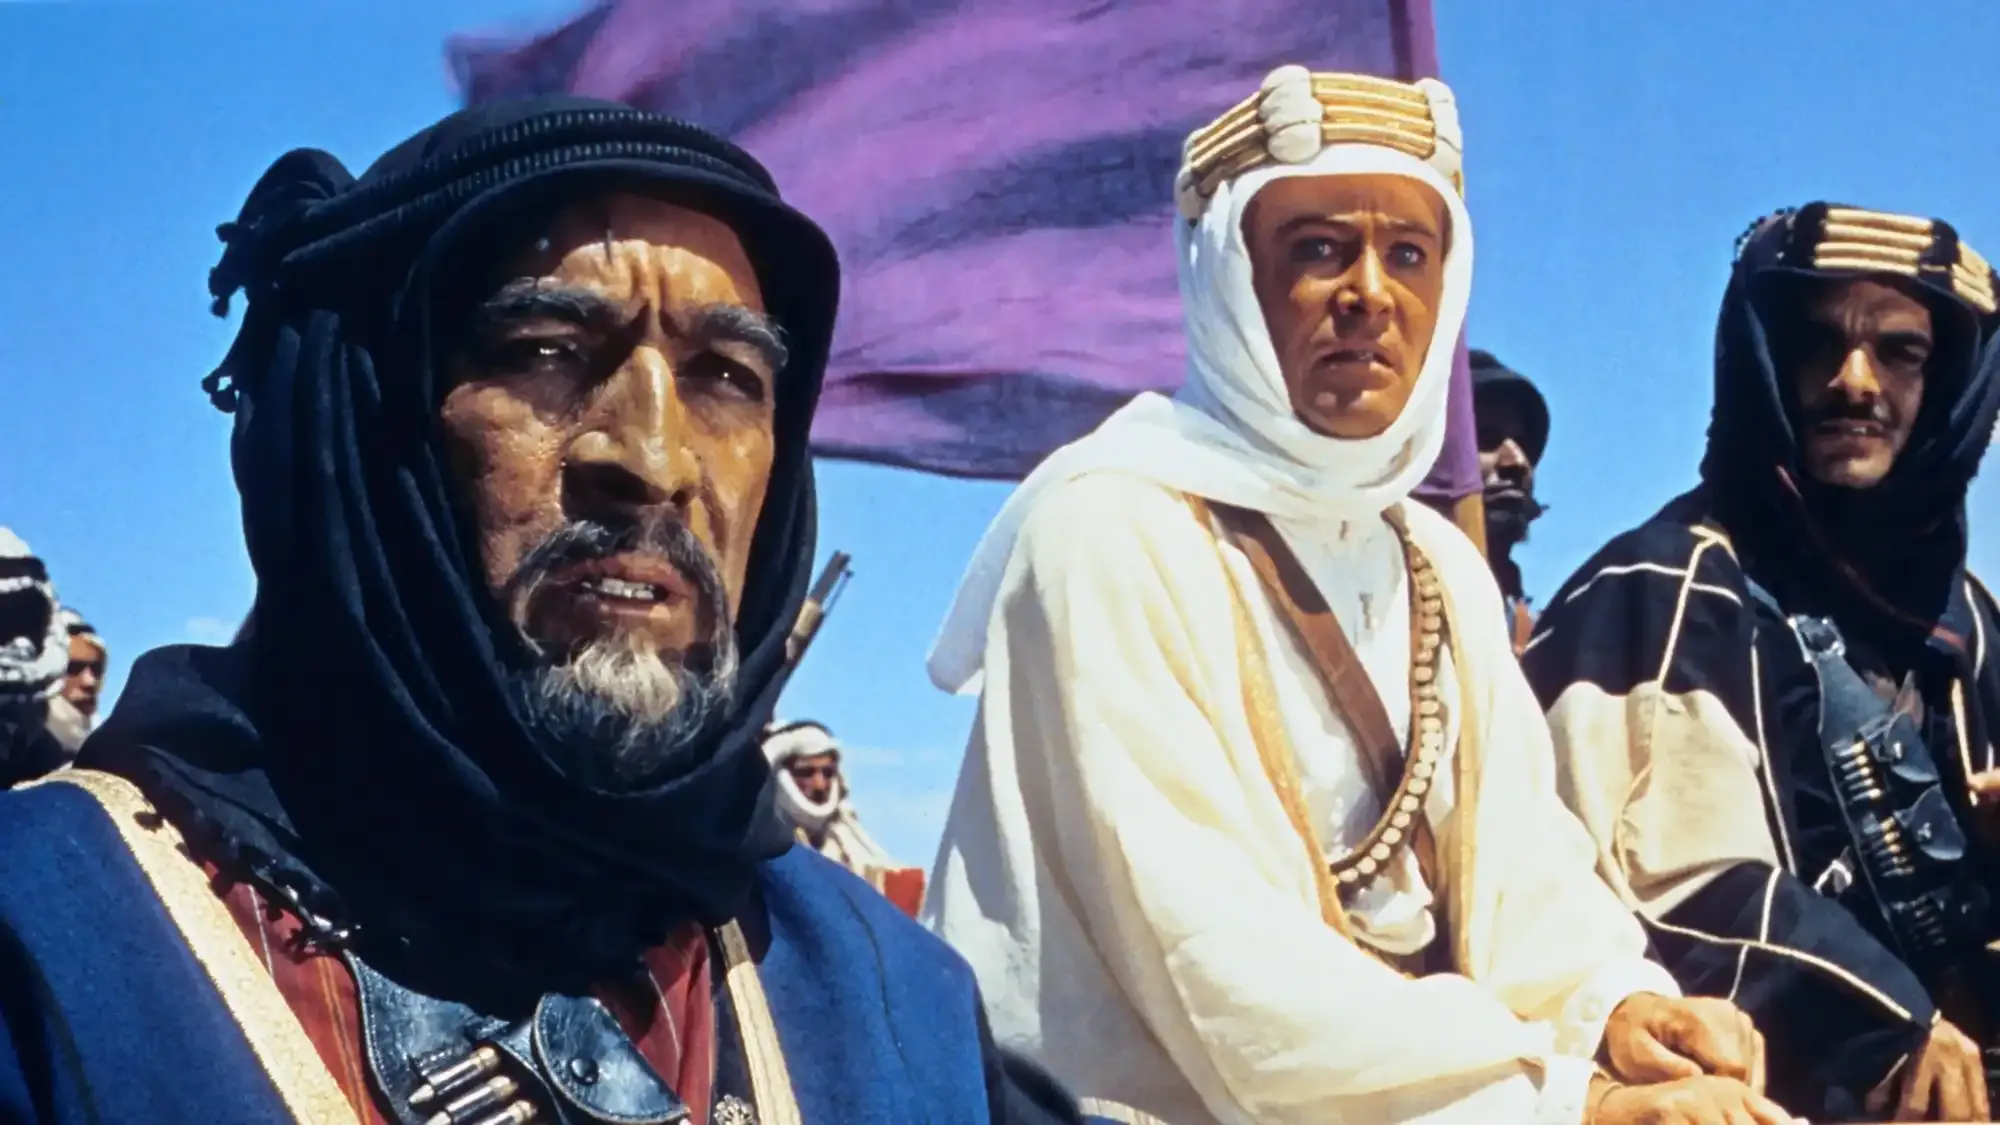 Lawrence of Arabia movie review